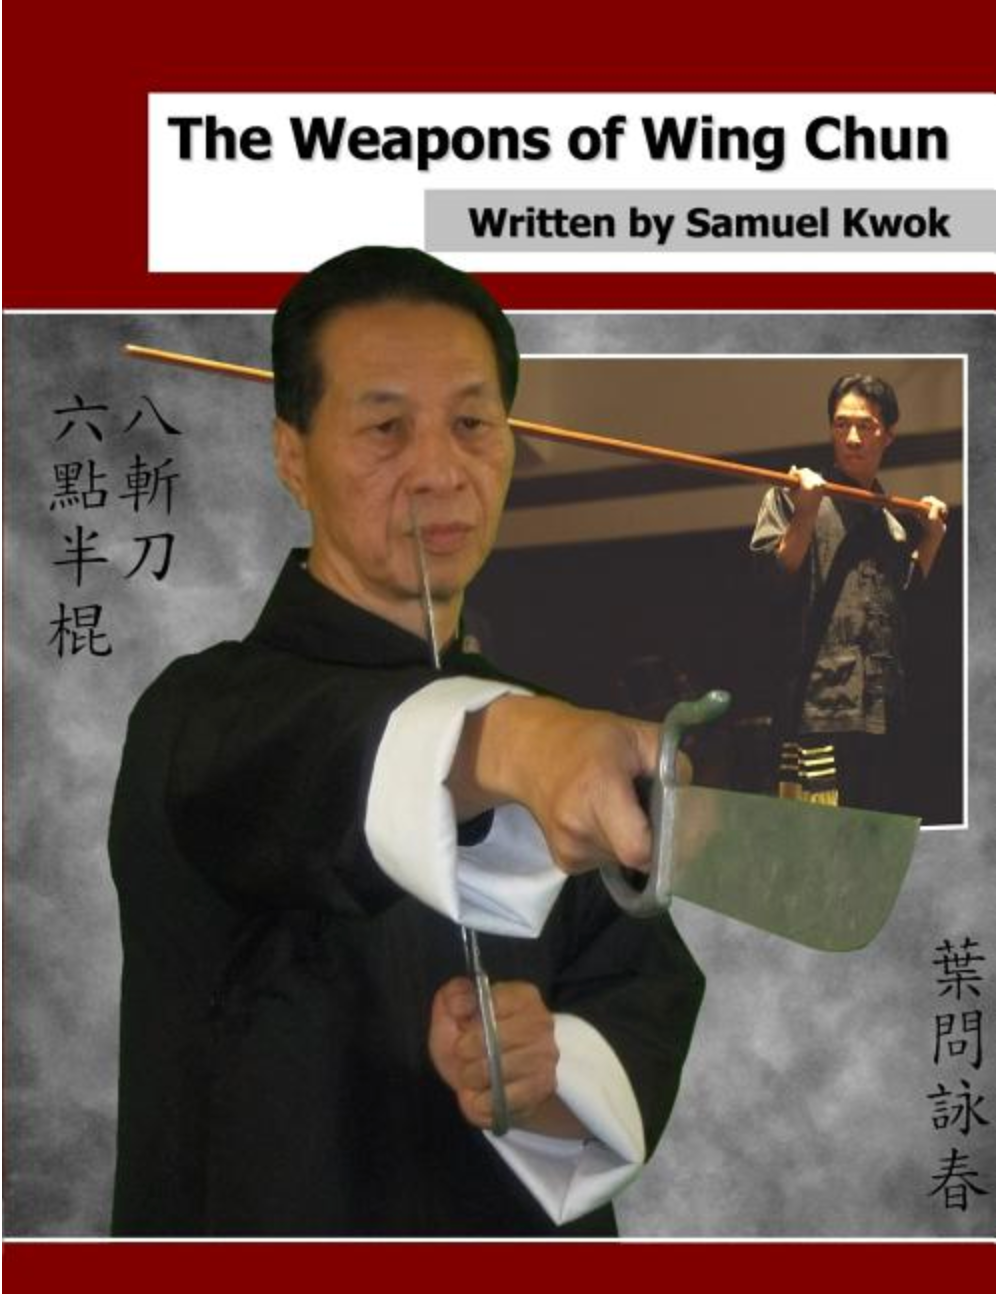 The Weapons of Wing Chun Book by Samuel Kwok - Budovideos